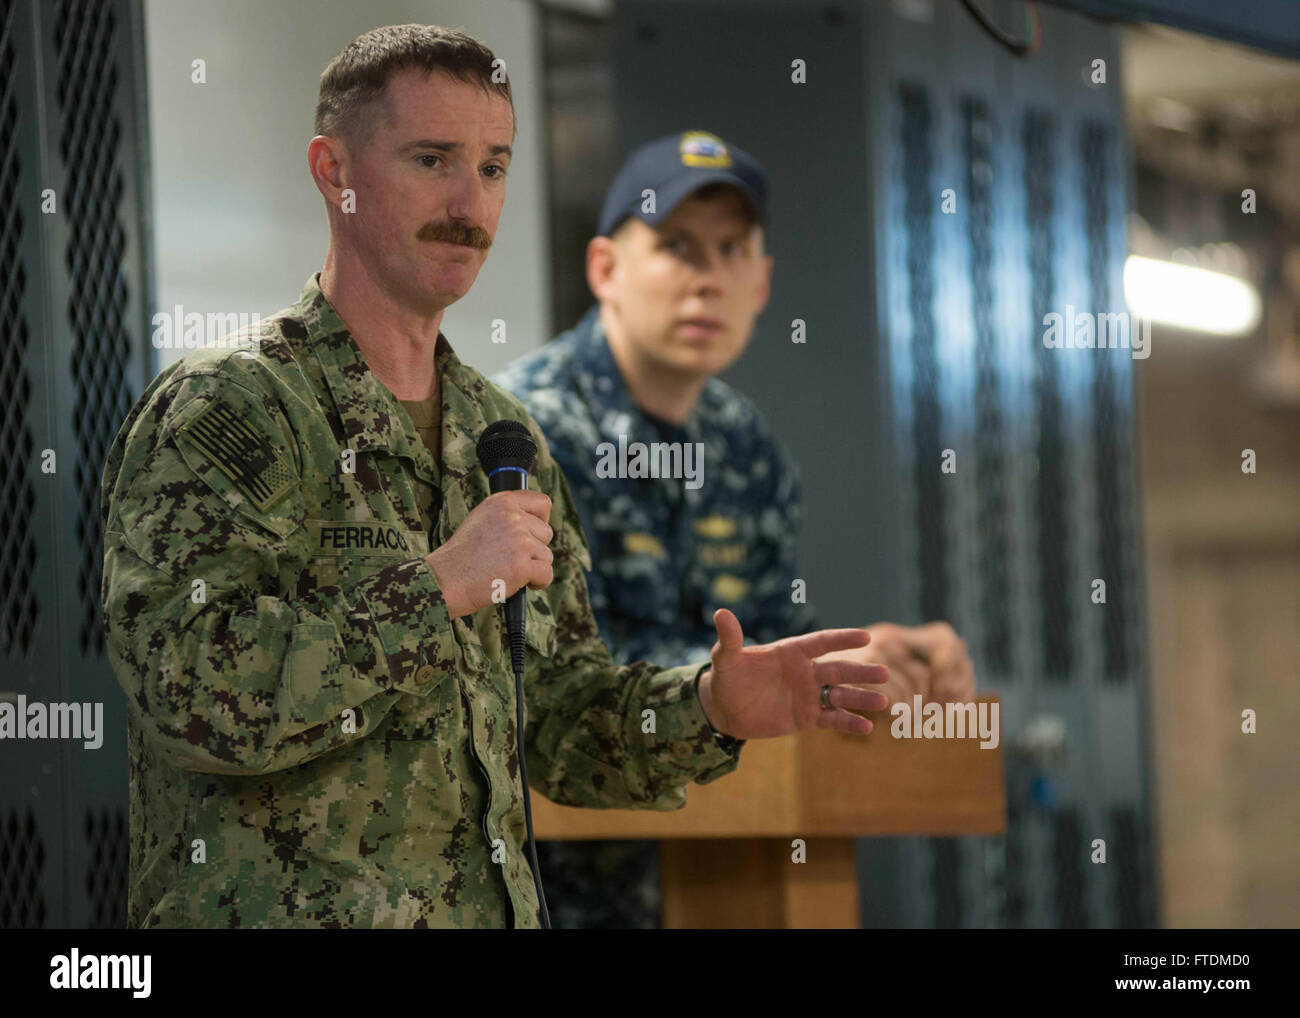 160215-N-WV703-040 SEKONDI, Ghana (Feb. 15, 2016) Cmdr. Tim Ferracci,  Africa Maritime Law Enforcement Partnership mission commander, addresses Ghanaian navy and combined boarding team members along with U.S. Navy and U.S. Coast Guard during an exercise debrief aboard USNS Spearhead (T-EPF 1) Feb. 15, 2016. The Military Sealift Command expeditionary fast transport vessel USNS Spearhead is on a scheduled deployment in the U.S. 6th Fleet area of operations to support the international collaborative capacity-building program Africa Partnership Station. (U.S. Navy photo by Mass Communication Speci Stock Photo